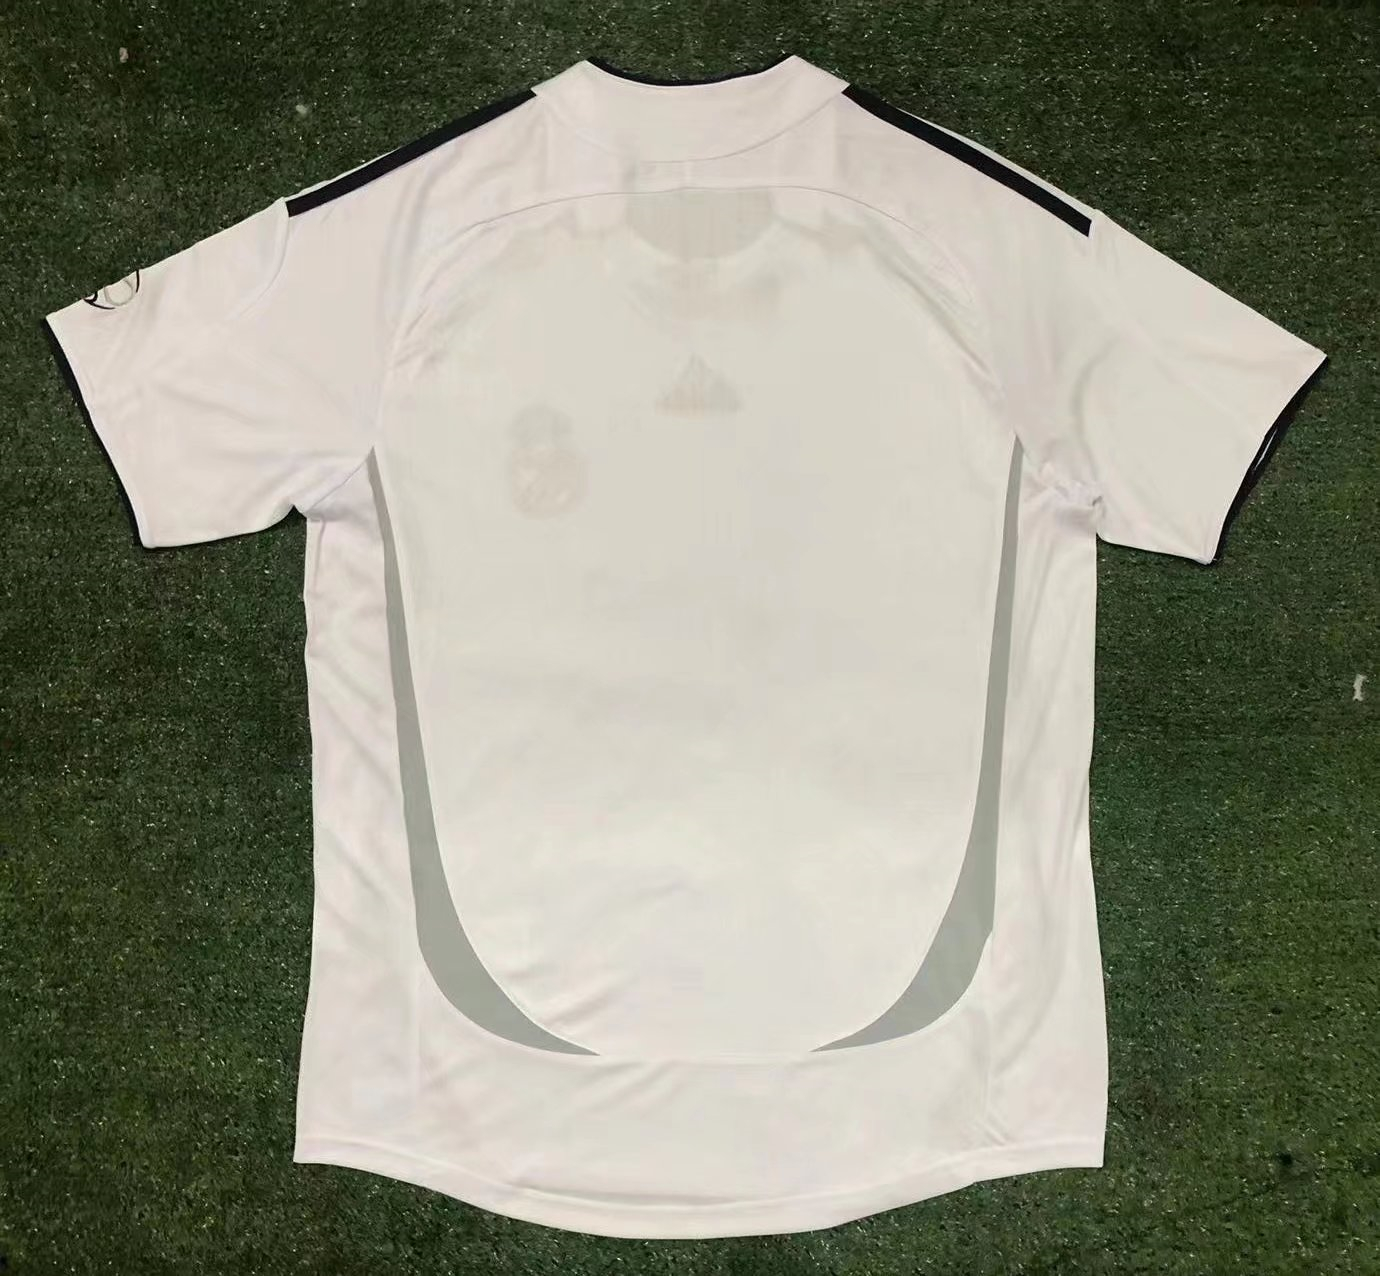 Real Madrid Soccer Jersey Replica White Teamgeist Mens 2021/22